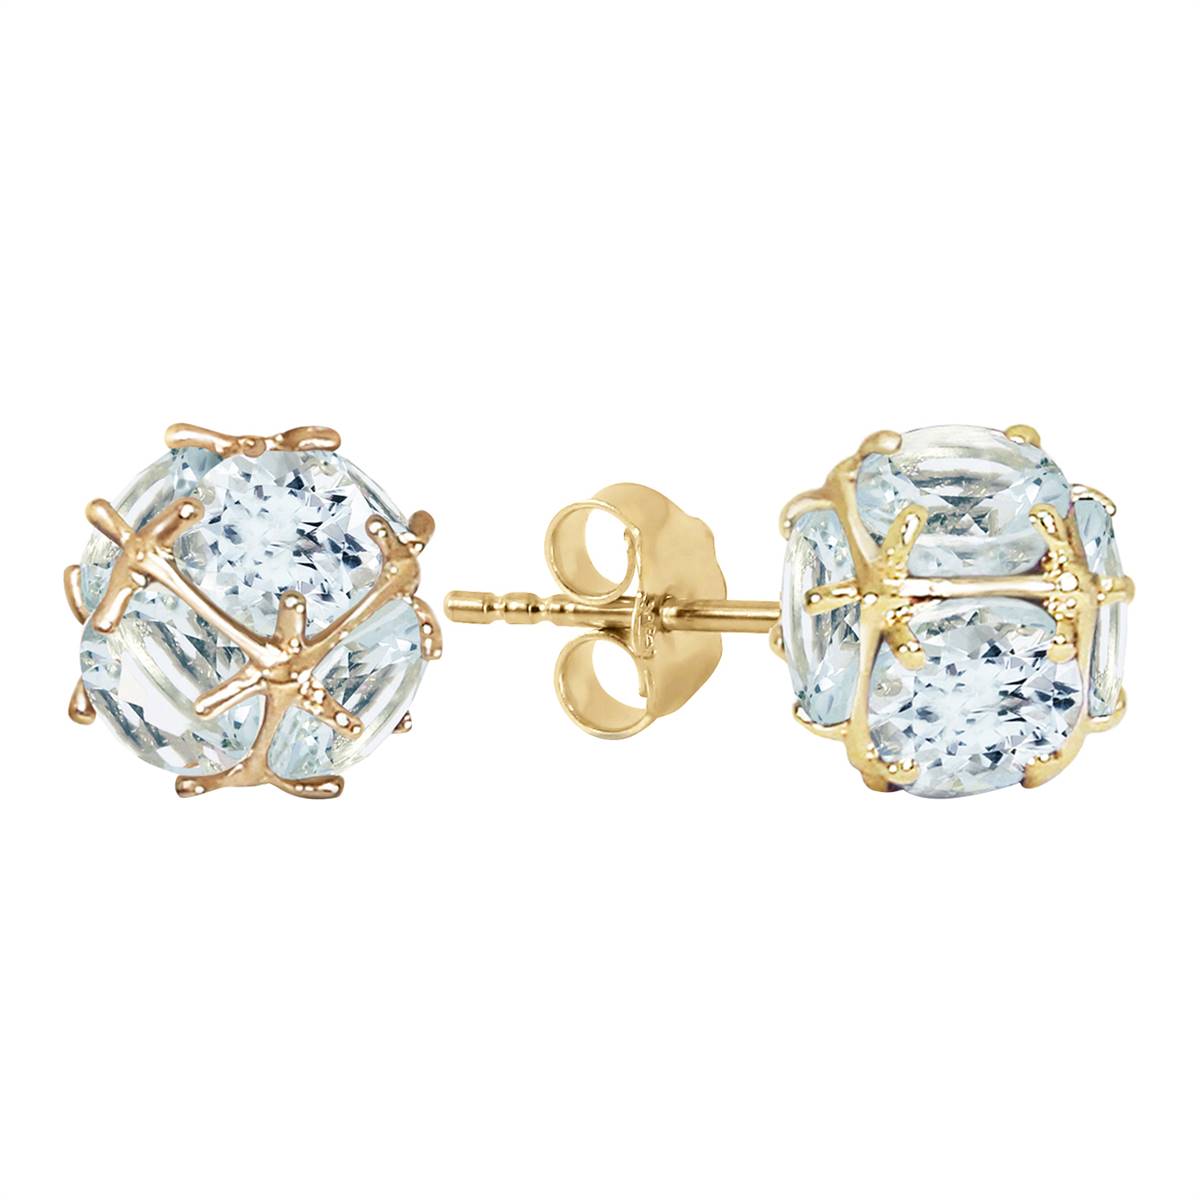 14K Solid Yellow Gold Stud Earrings w/ Natural Aquamarines